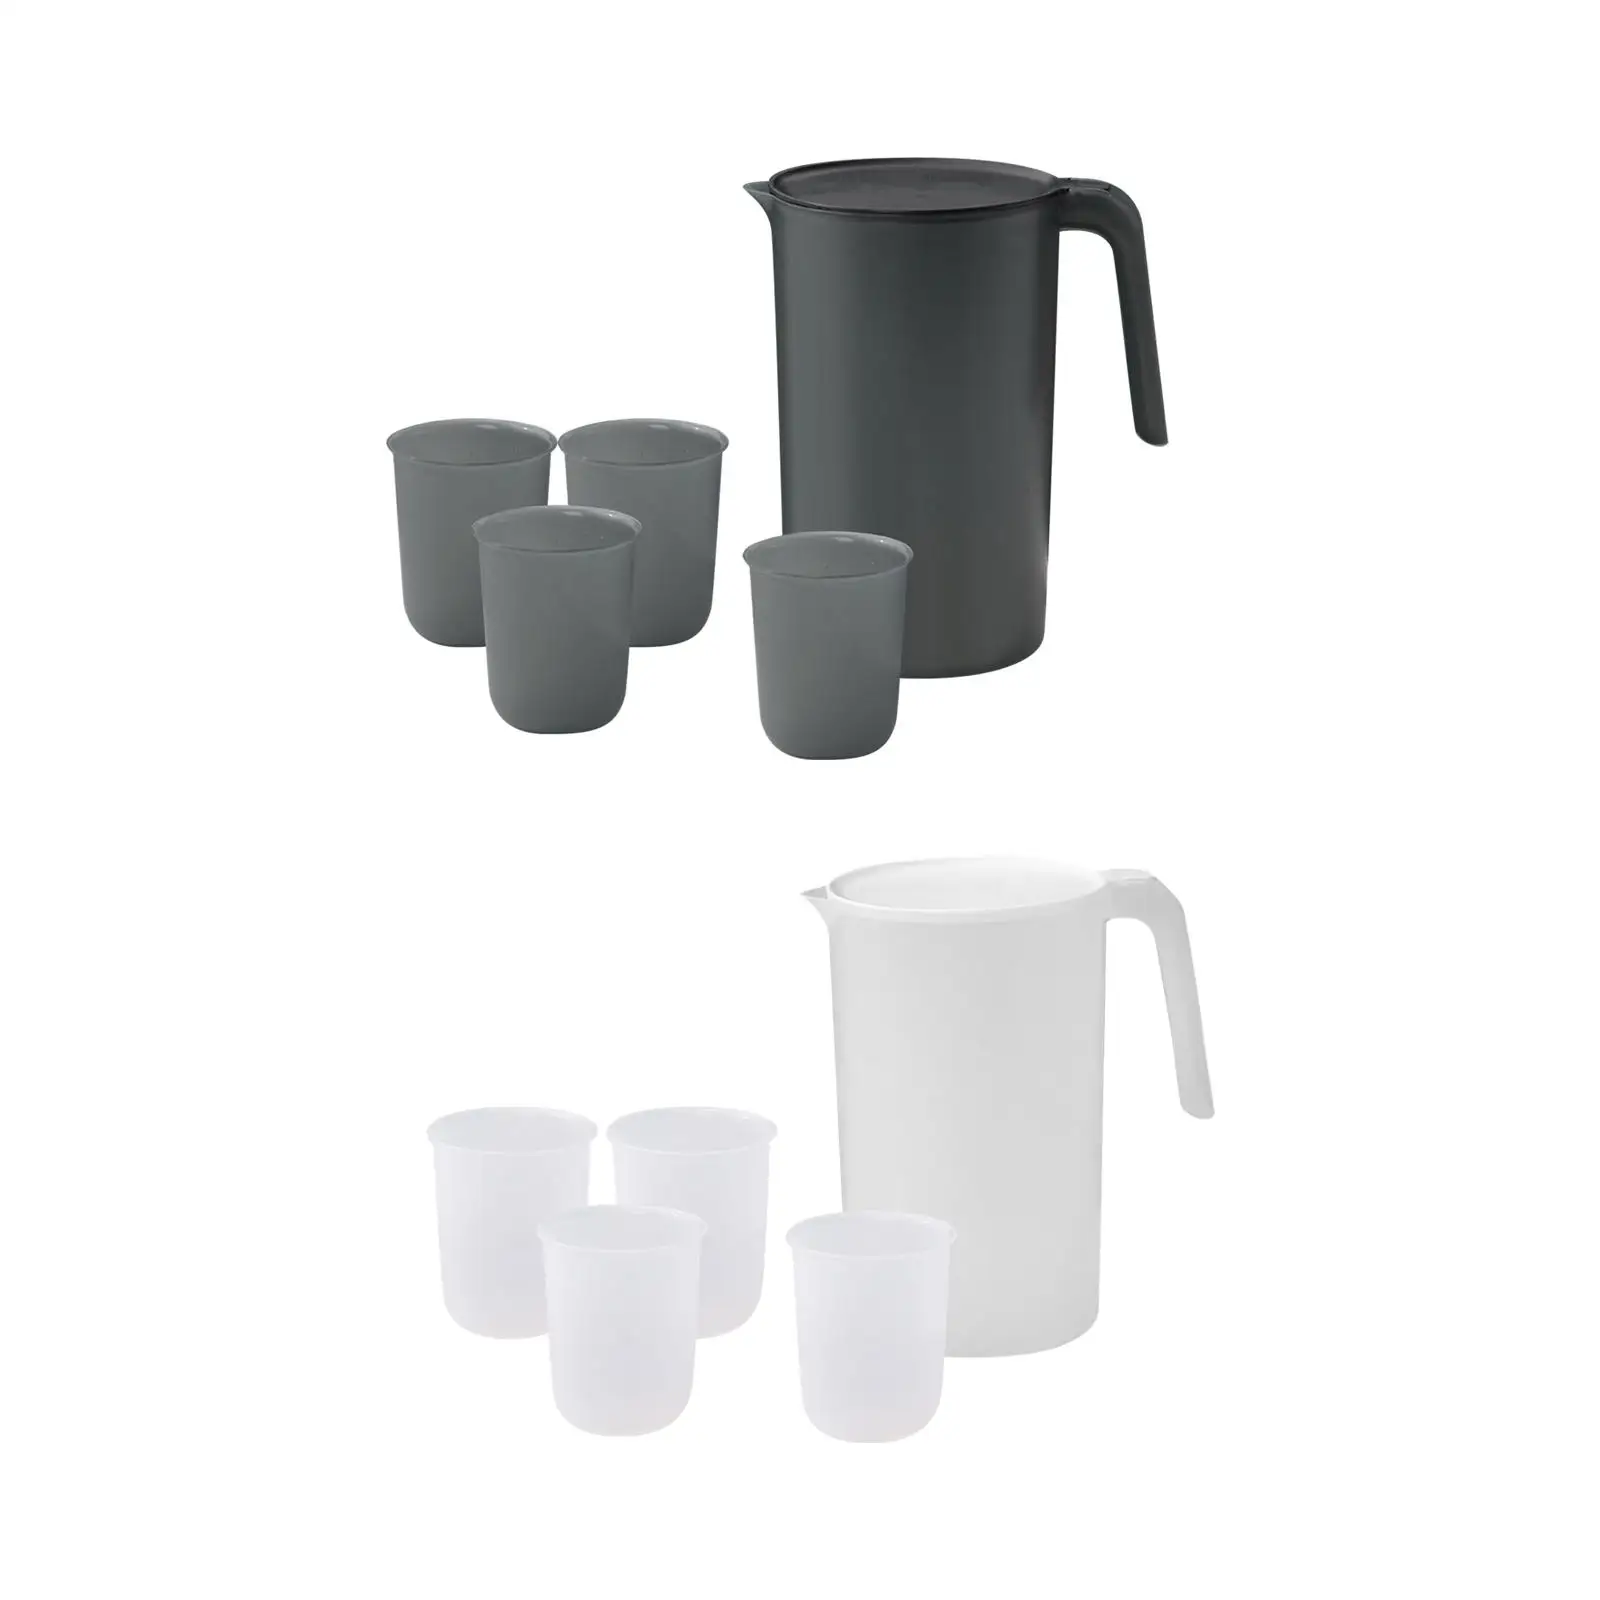 2500ml Water Jug Pitcher with 4 Cups Beverage Jar Easy to Fill Tea Kettle Water Jar Water Kettle for Hot Cold for Kitchen Office